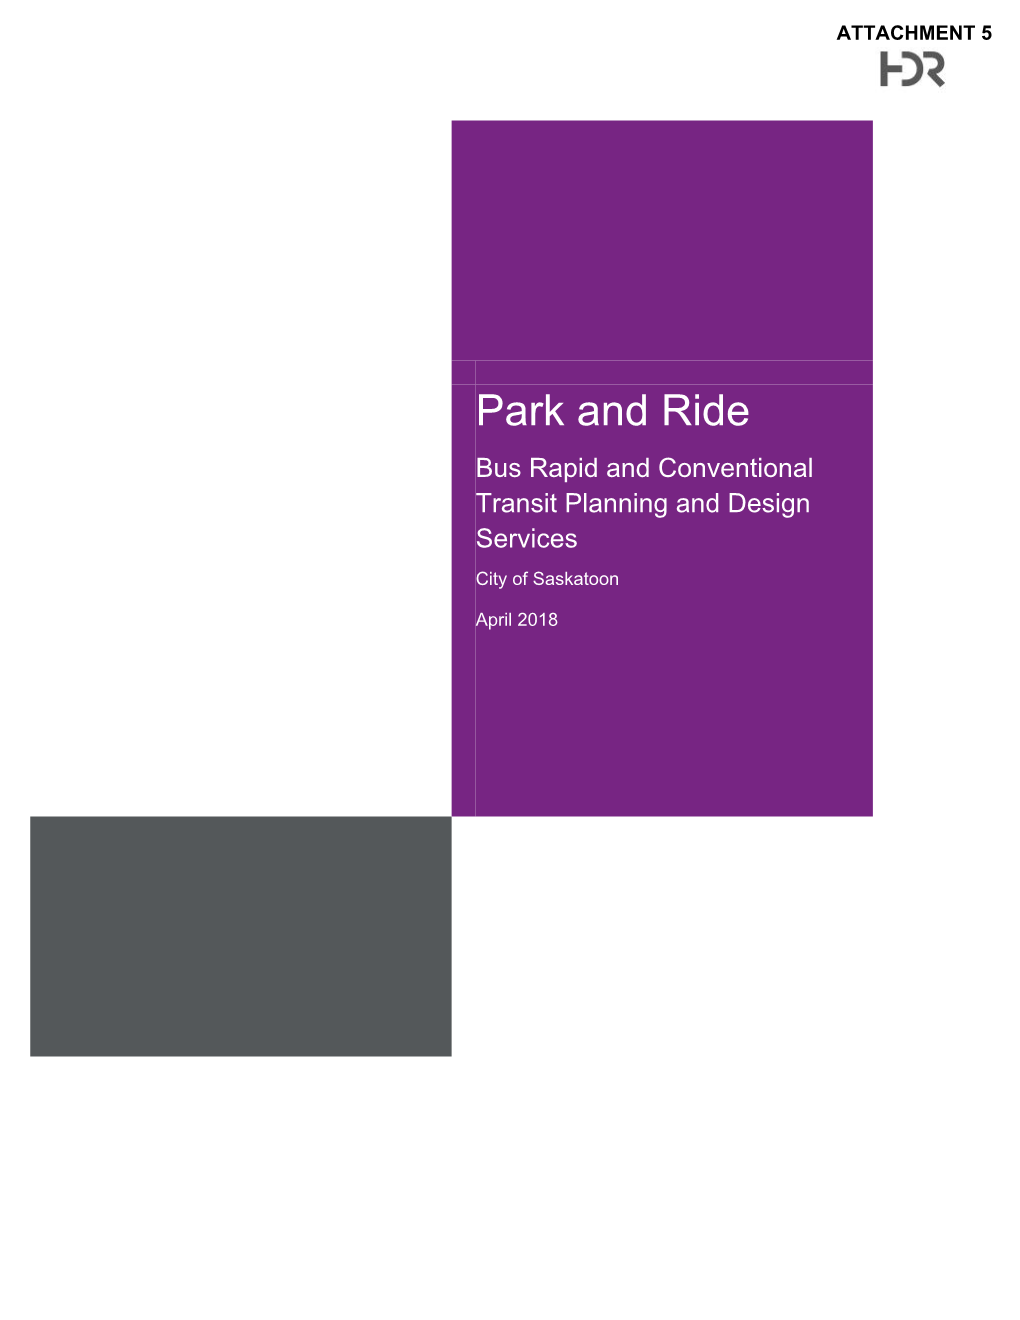 Park and Ride Bus Rapid and Conventional Transit Planning and Design Services City of Saskatoon